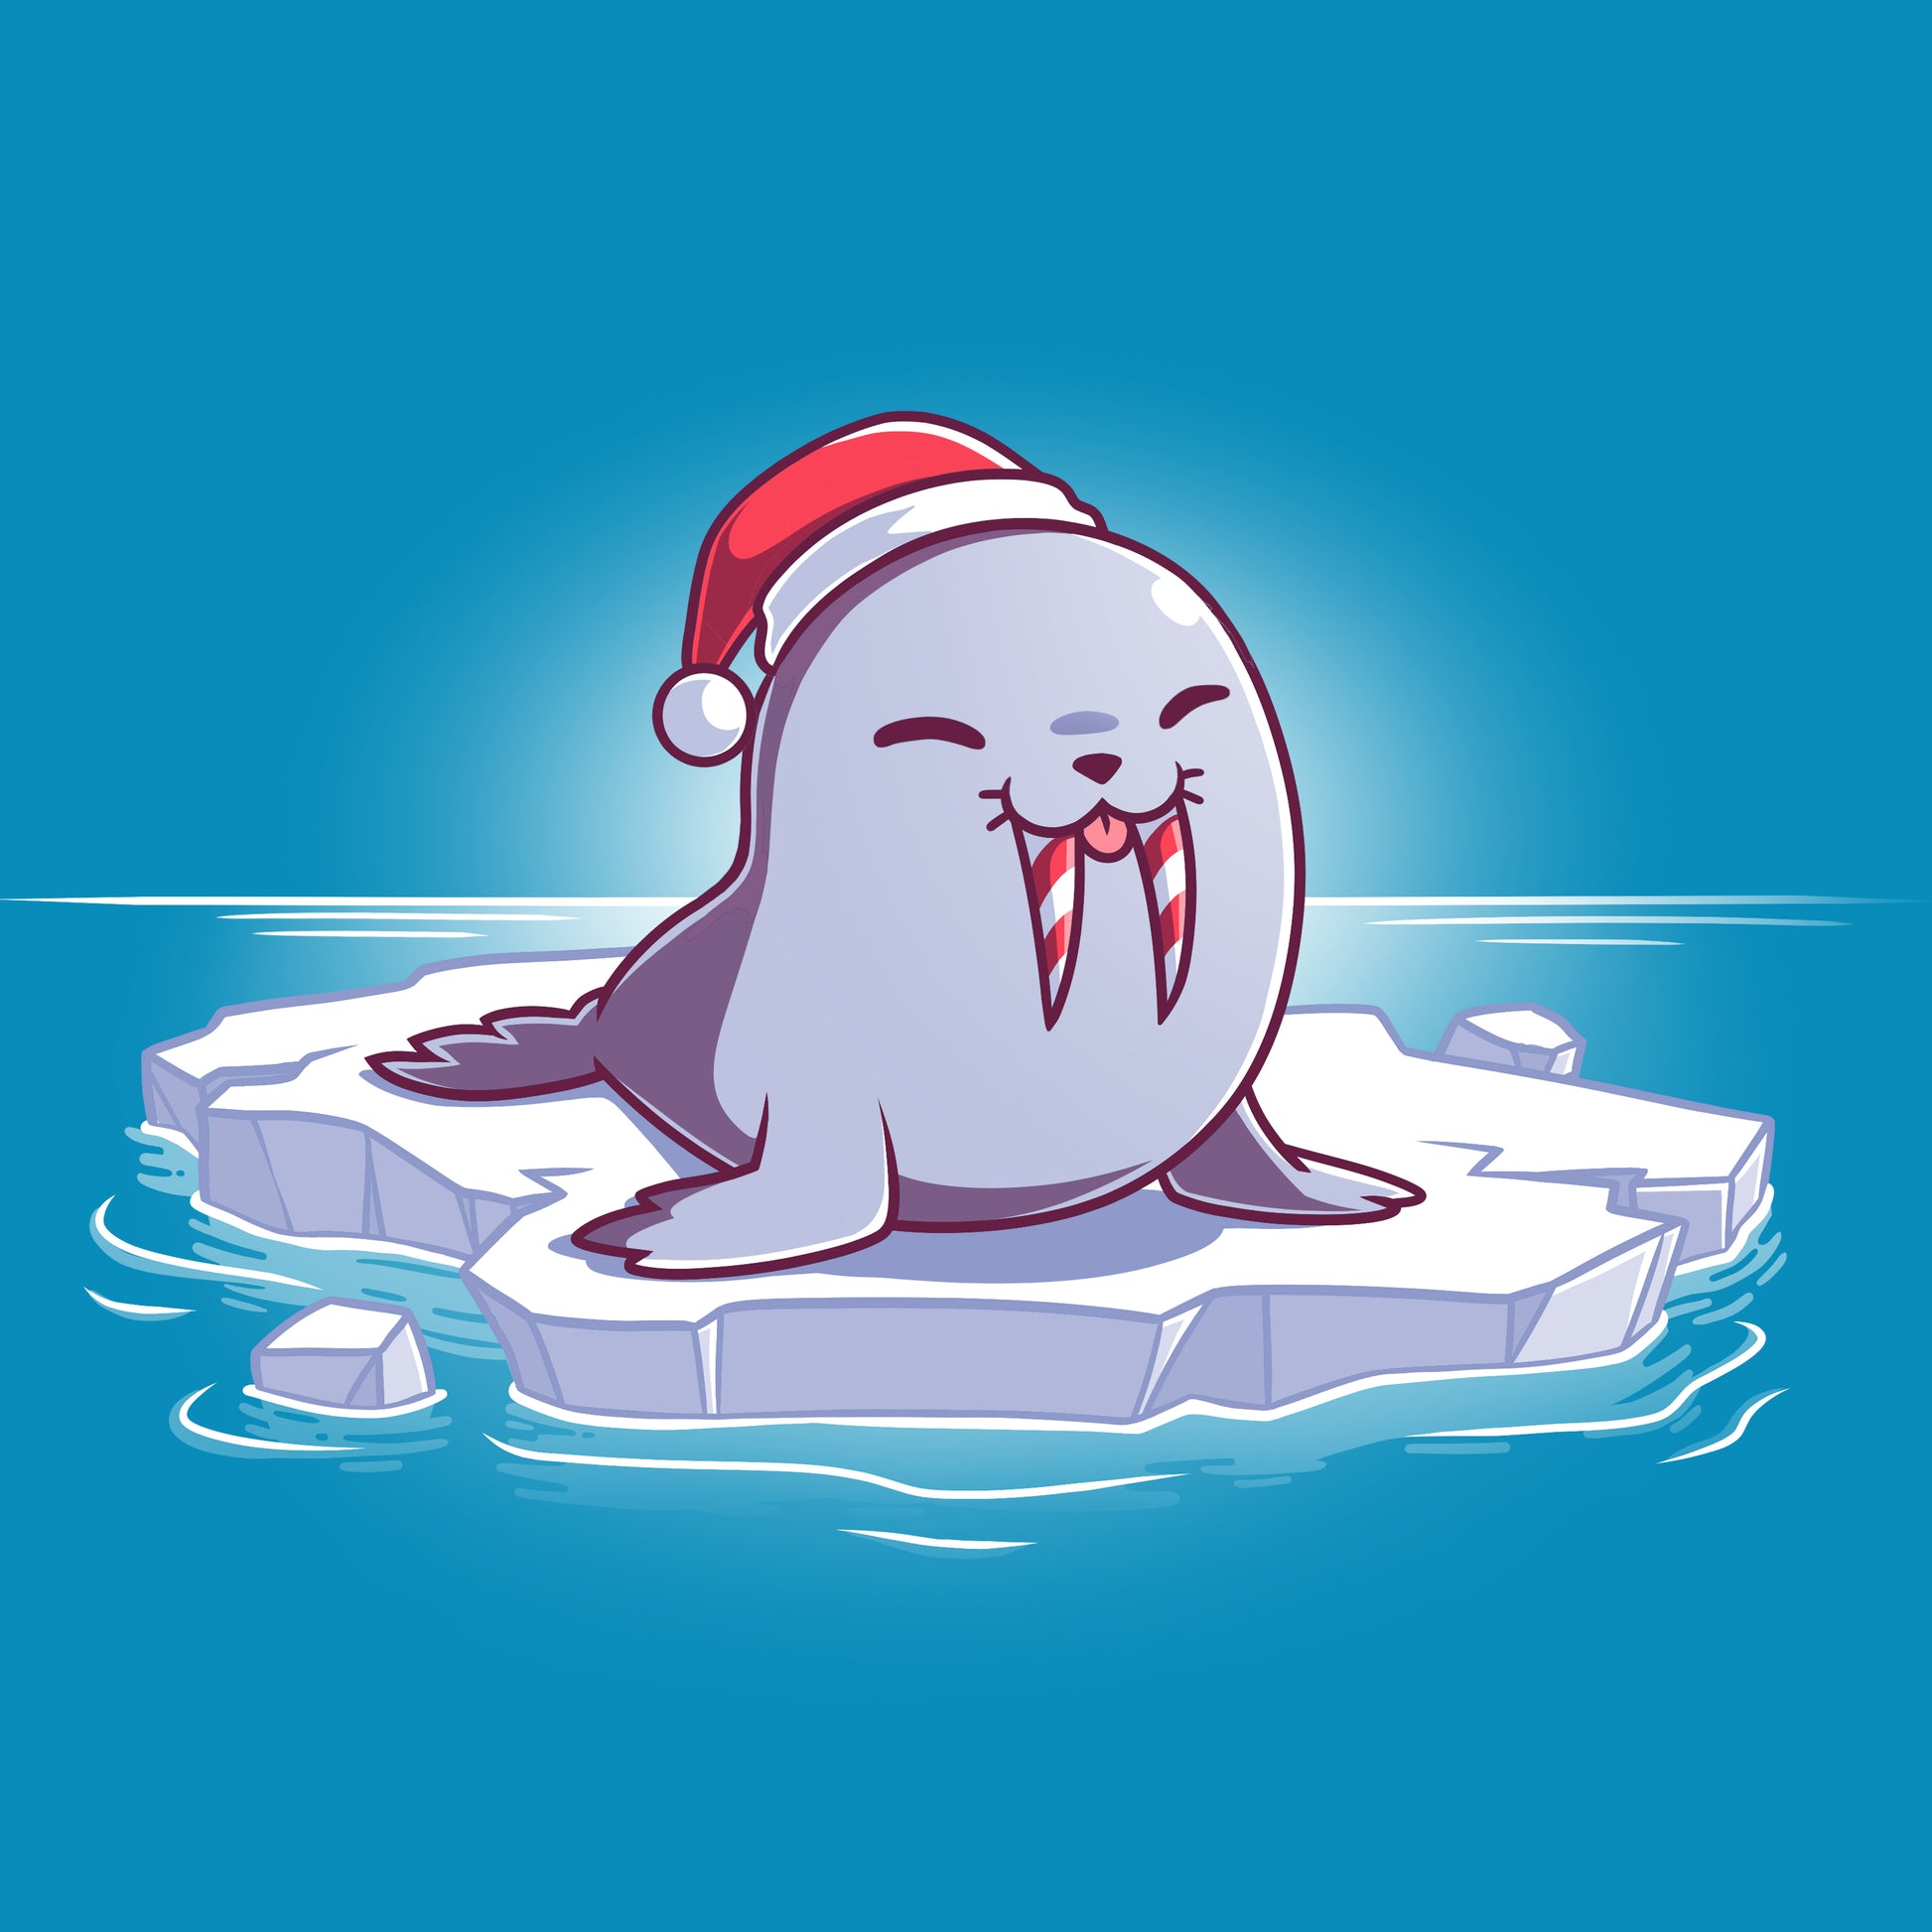 A Sweet Tooth by TeeTurtle, wearing a Santa hat on an ice floe, perfect for the holiday season.